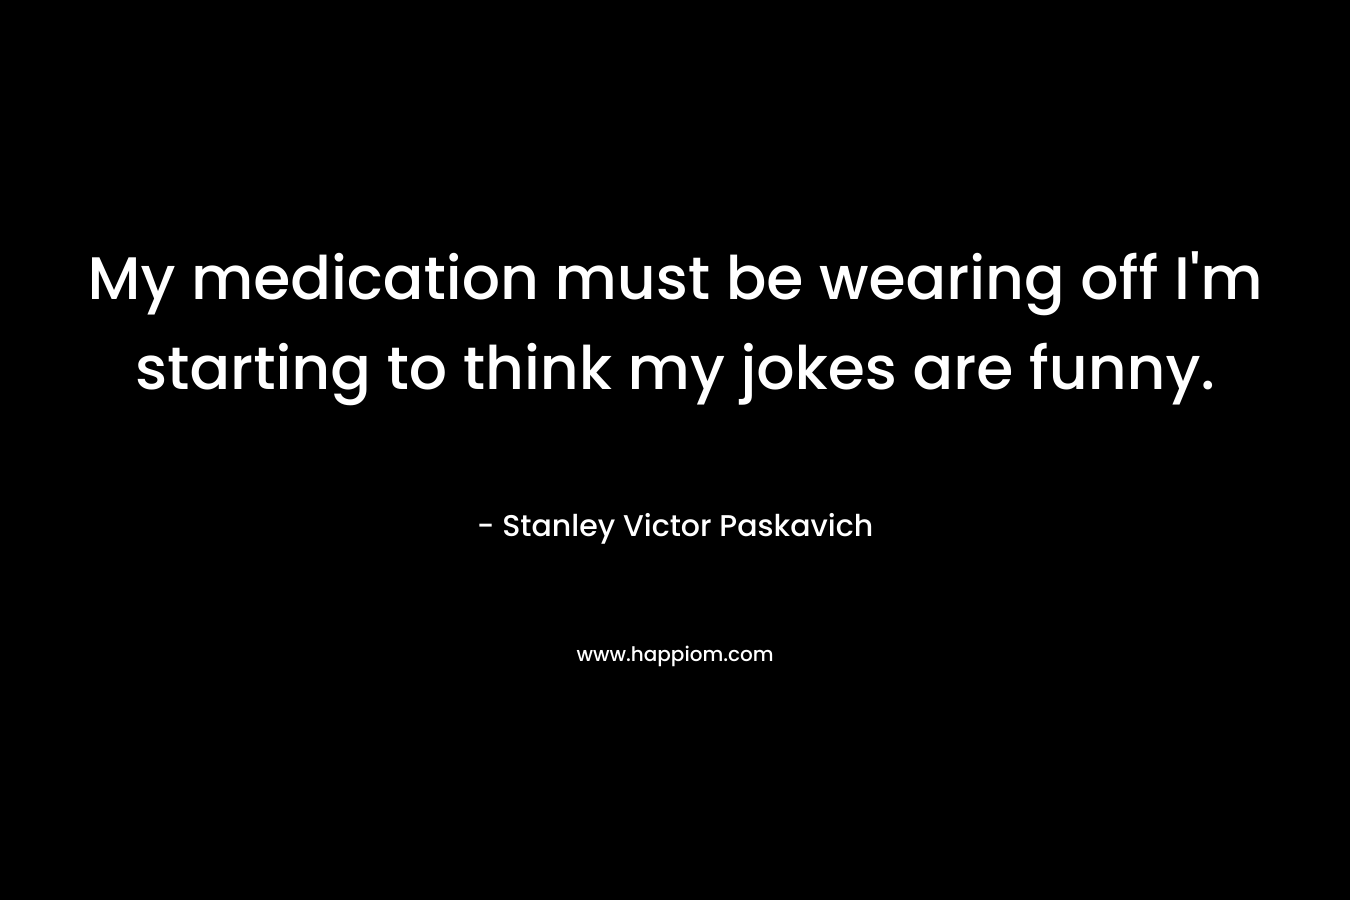 My medication must be wearing off I’m starting to think my jokes are funny. – Stanley Victor Paskavich